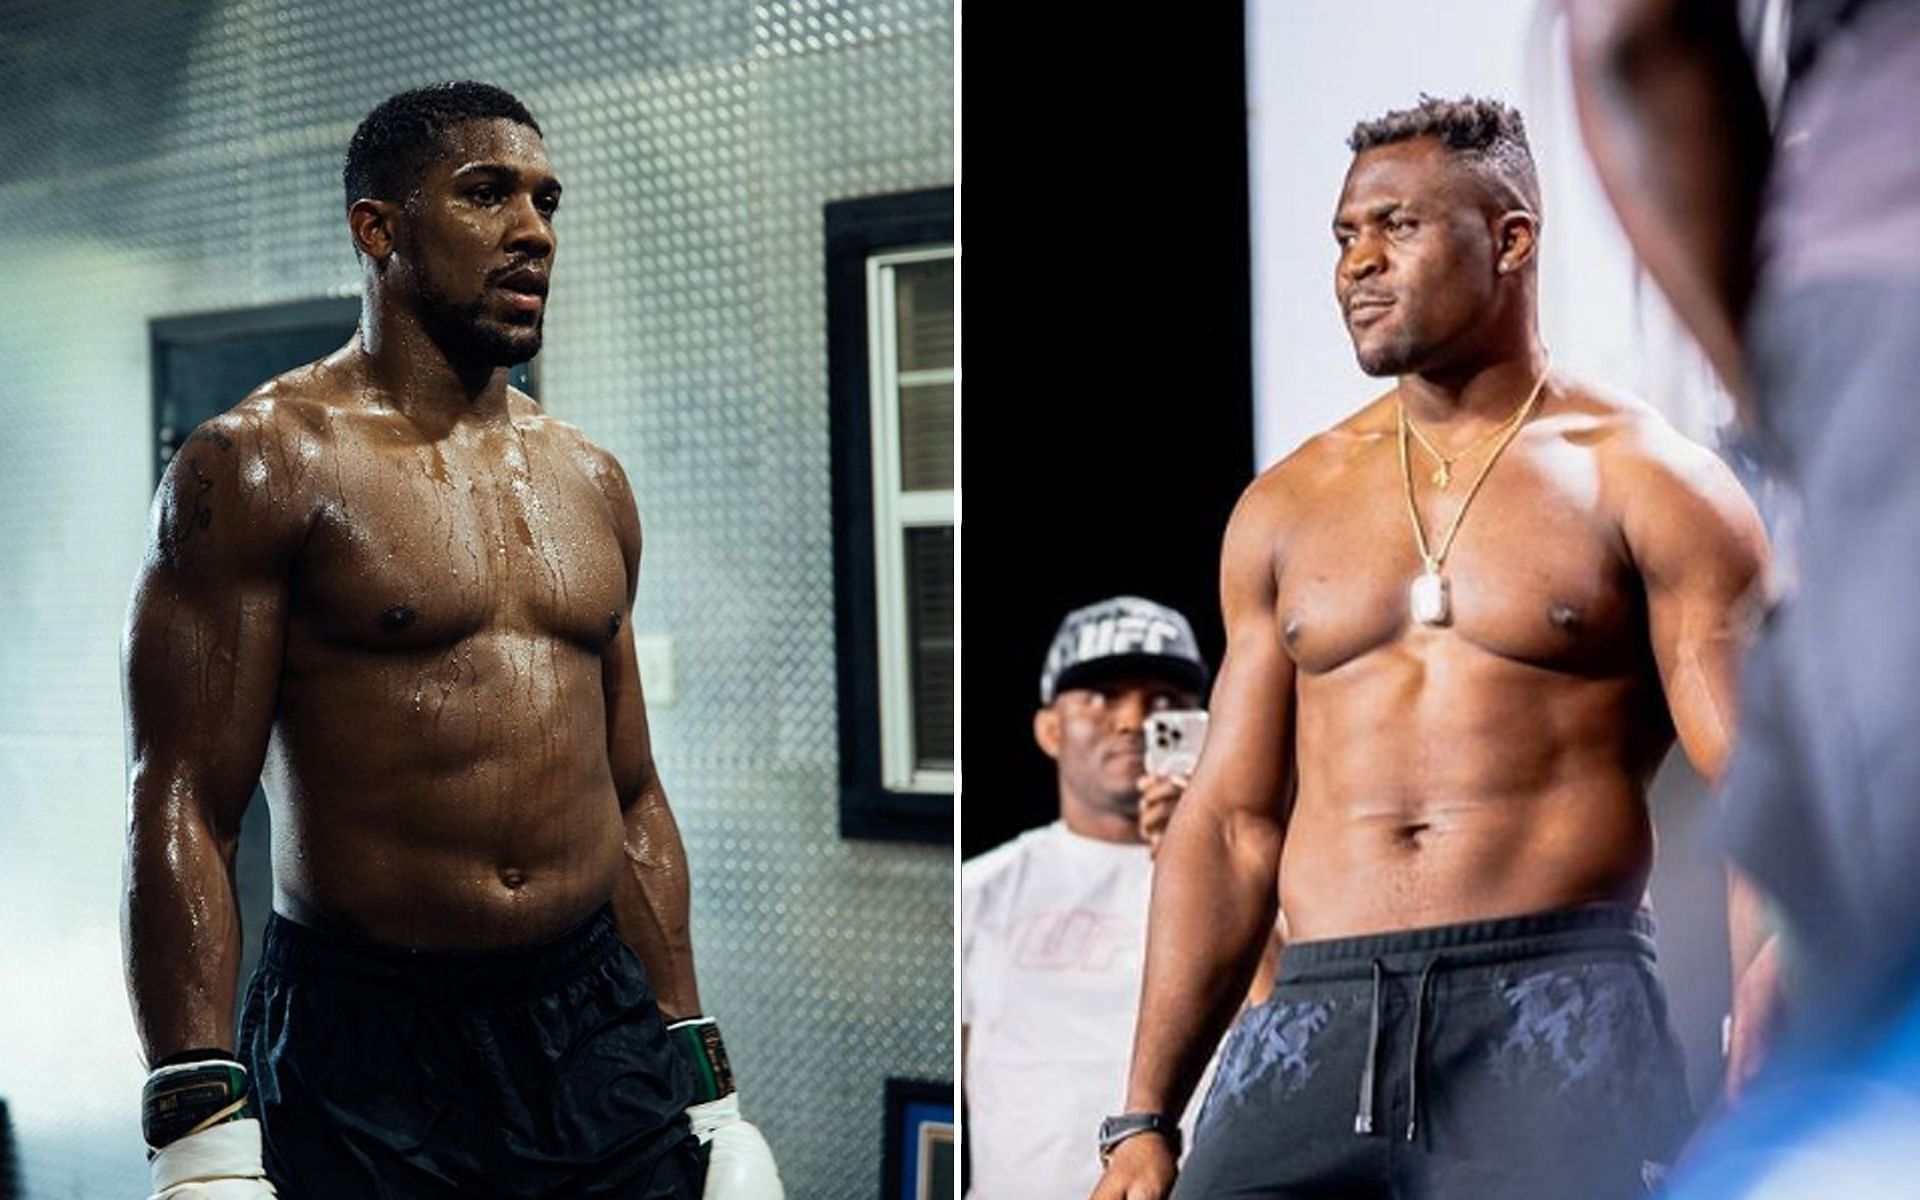 Anthony Joshua [L] and Francis Ngannou [R] [Images via @anthonyjoshua and @francisngannou Instagram]